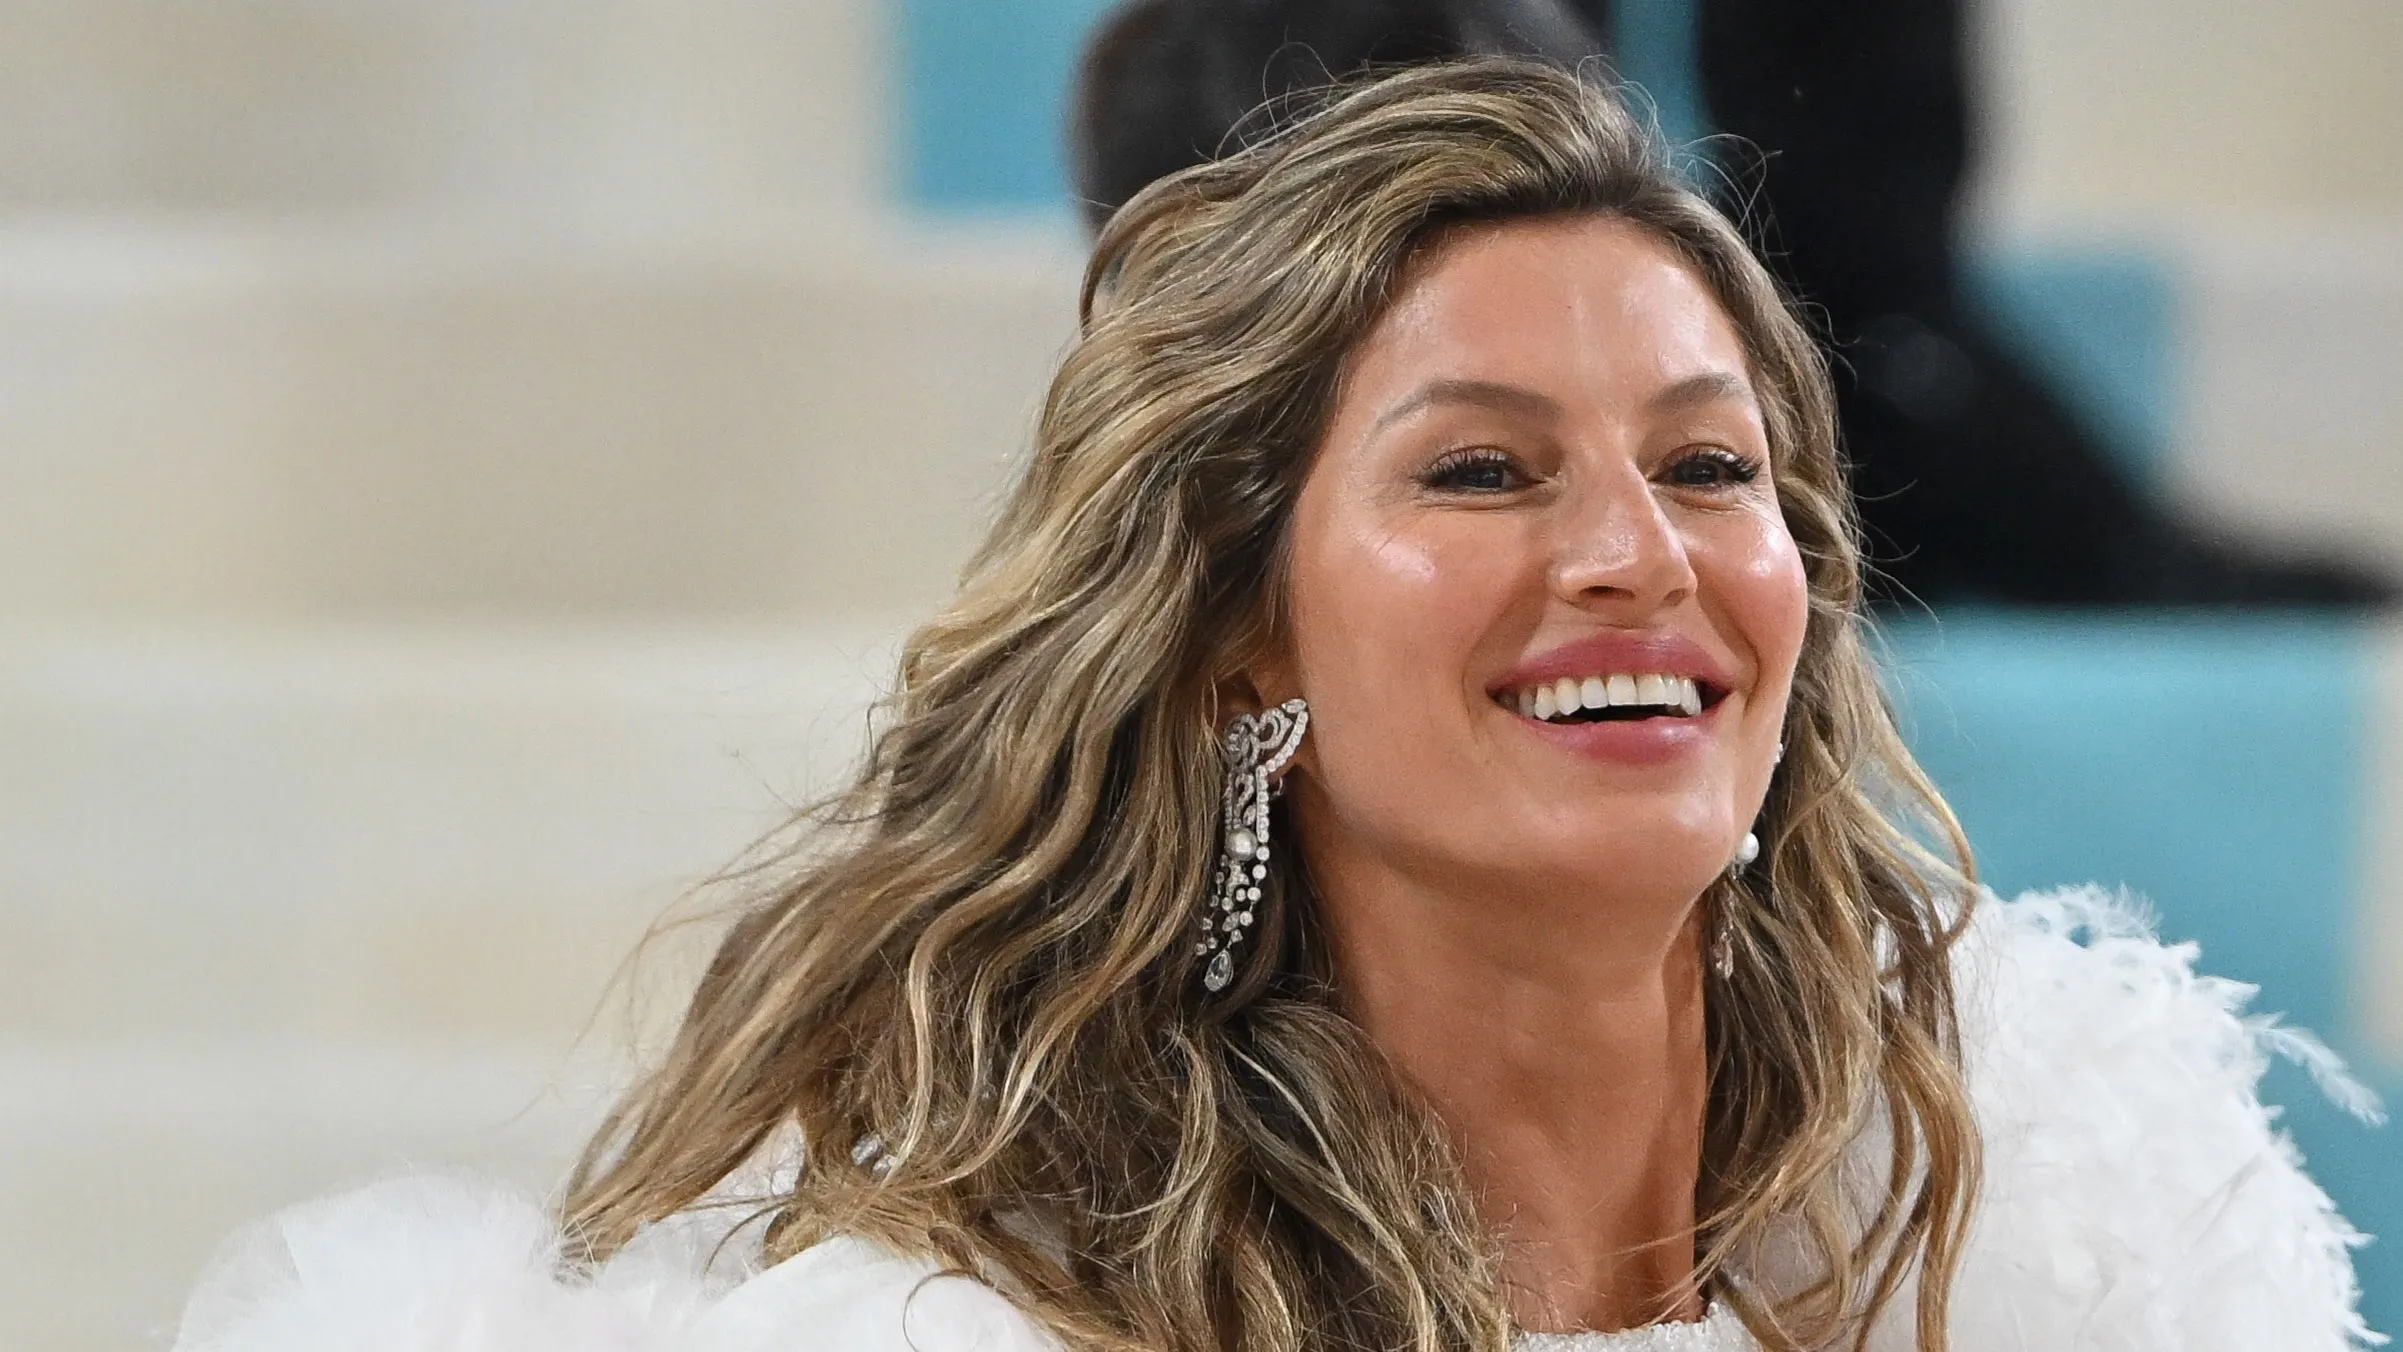 Gisele spills the ultimate tea on her breakup with Tom Brady 